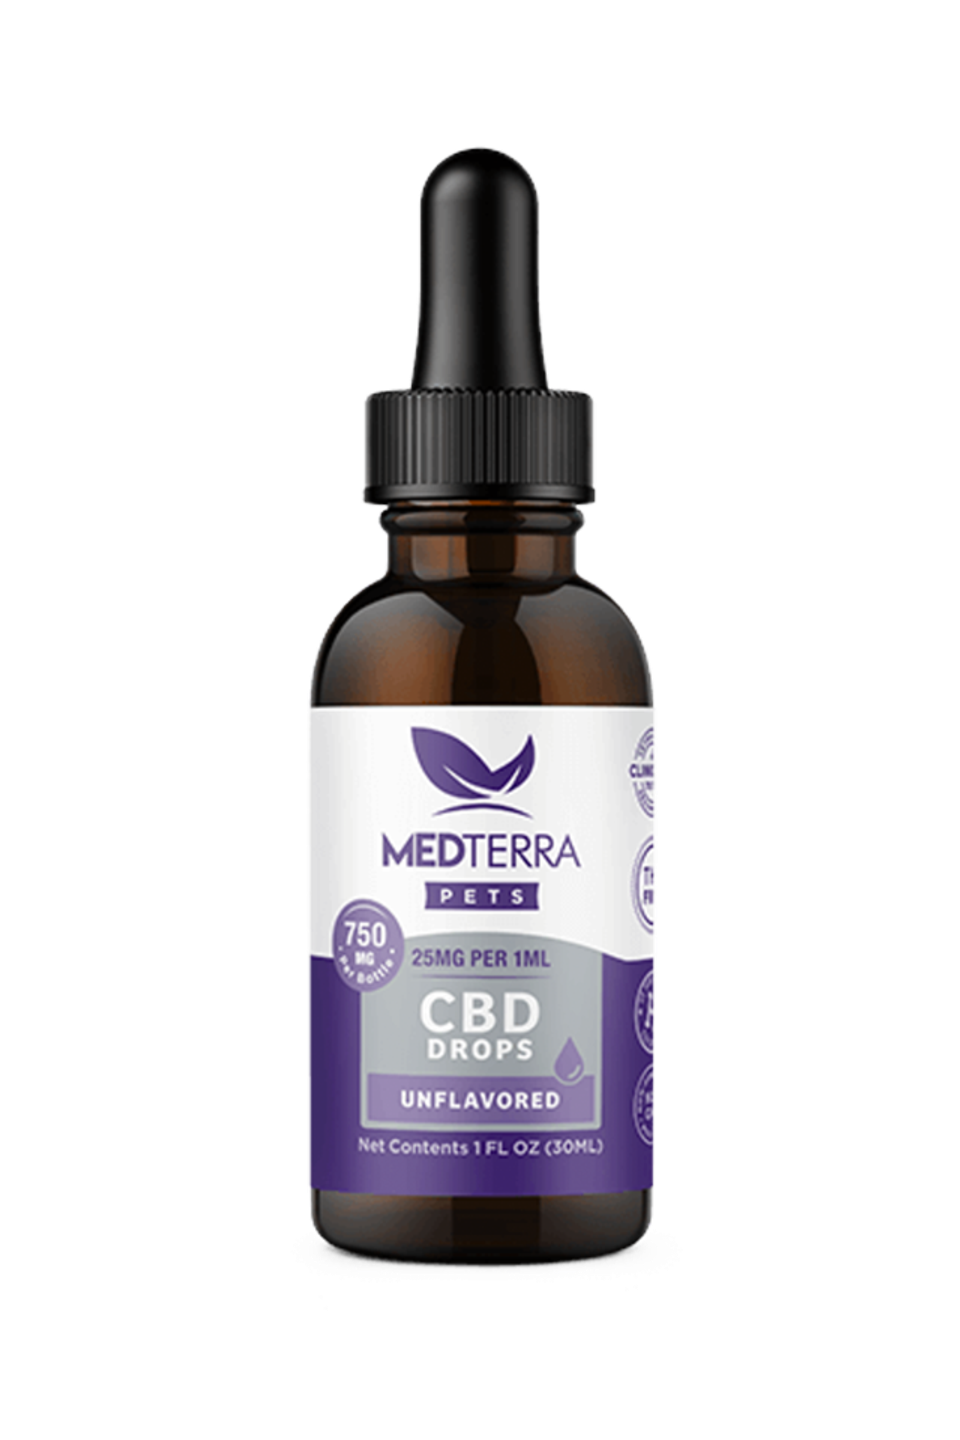 Cbd tincture pets unflavored 750mg